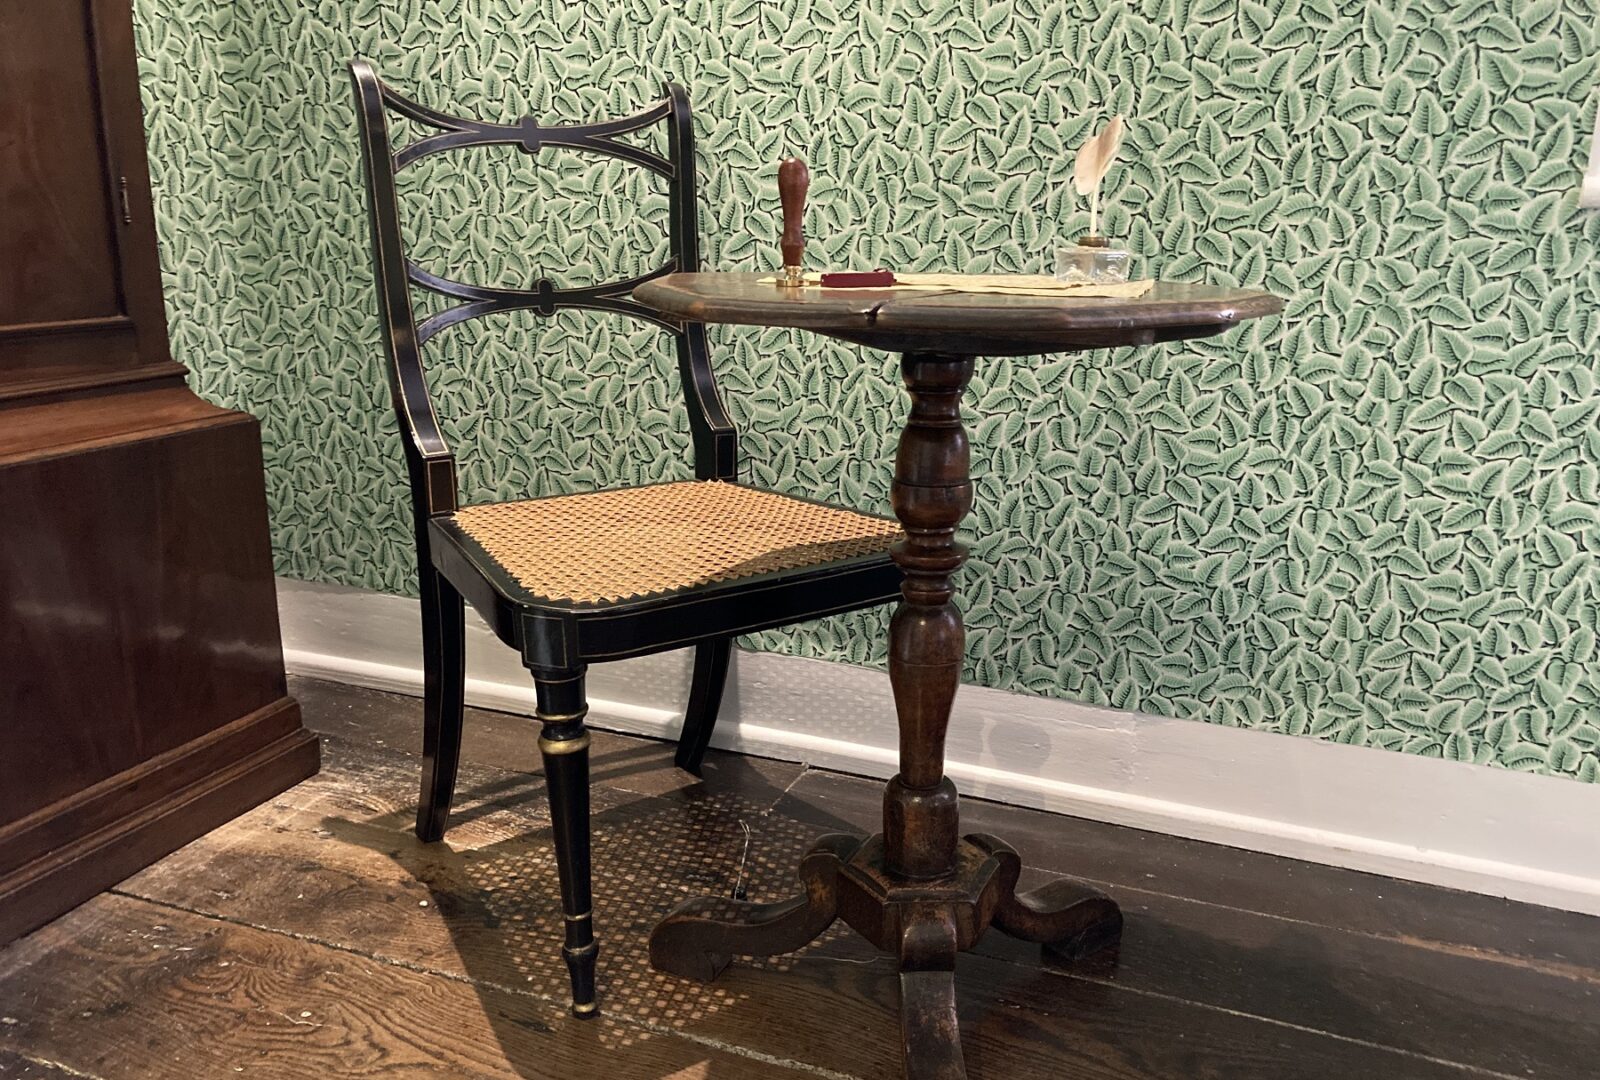 Jane Austen's writing table in the Dining Room at Jane Austen's House